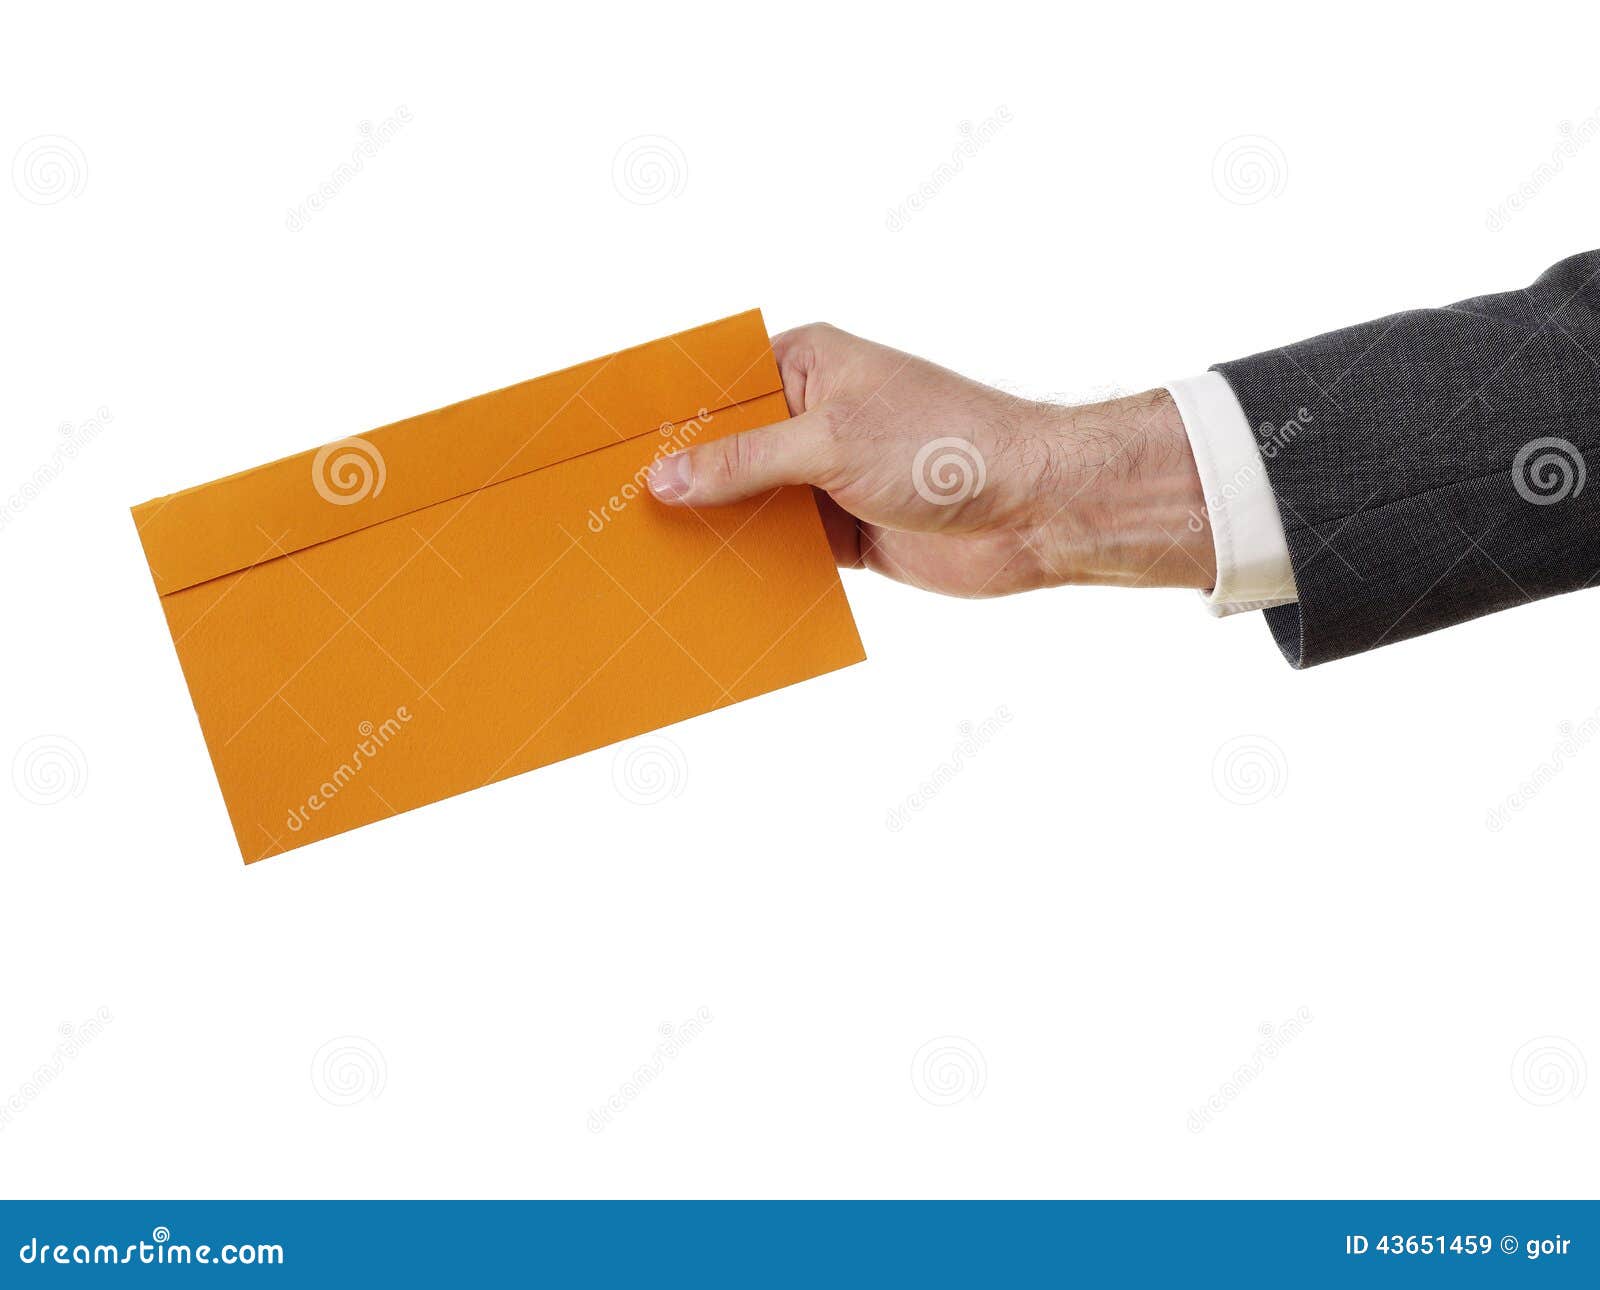 Mailman with Envelope - Stock Image Stock Image - Image of worker ...